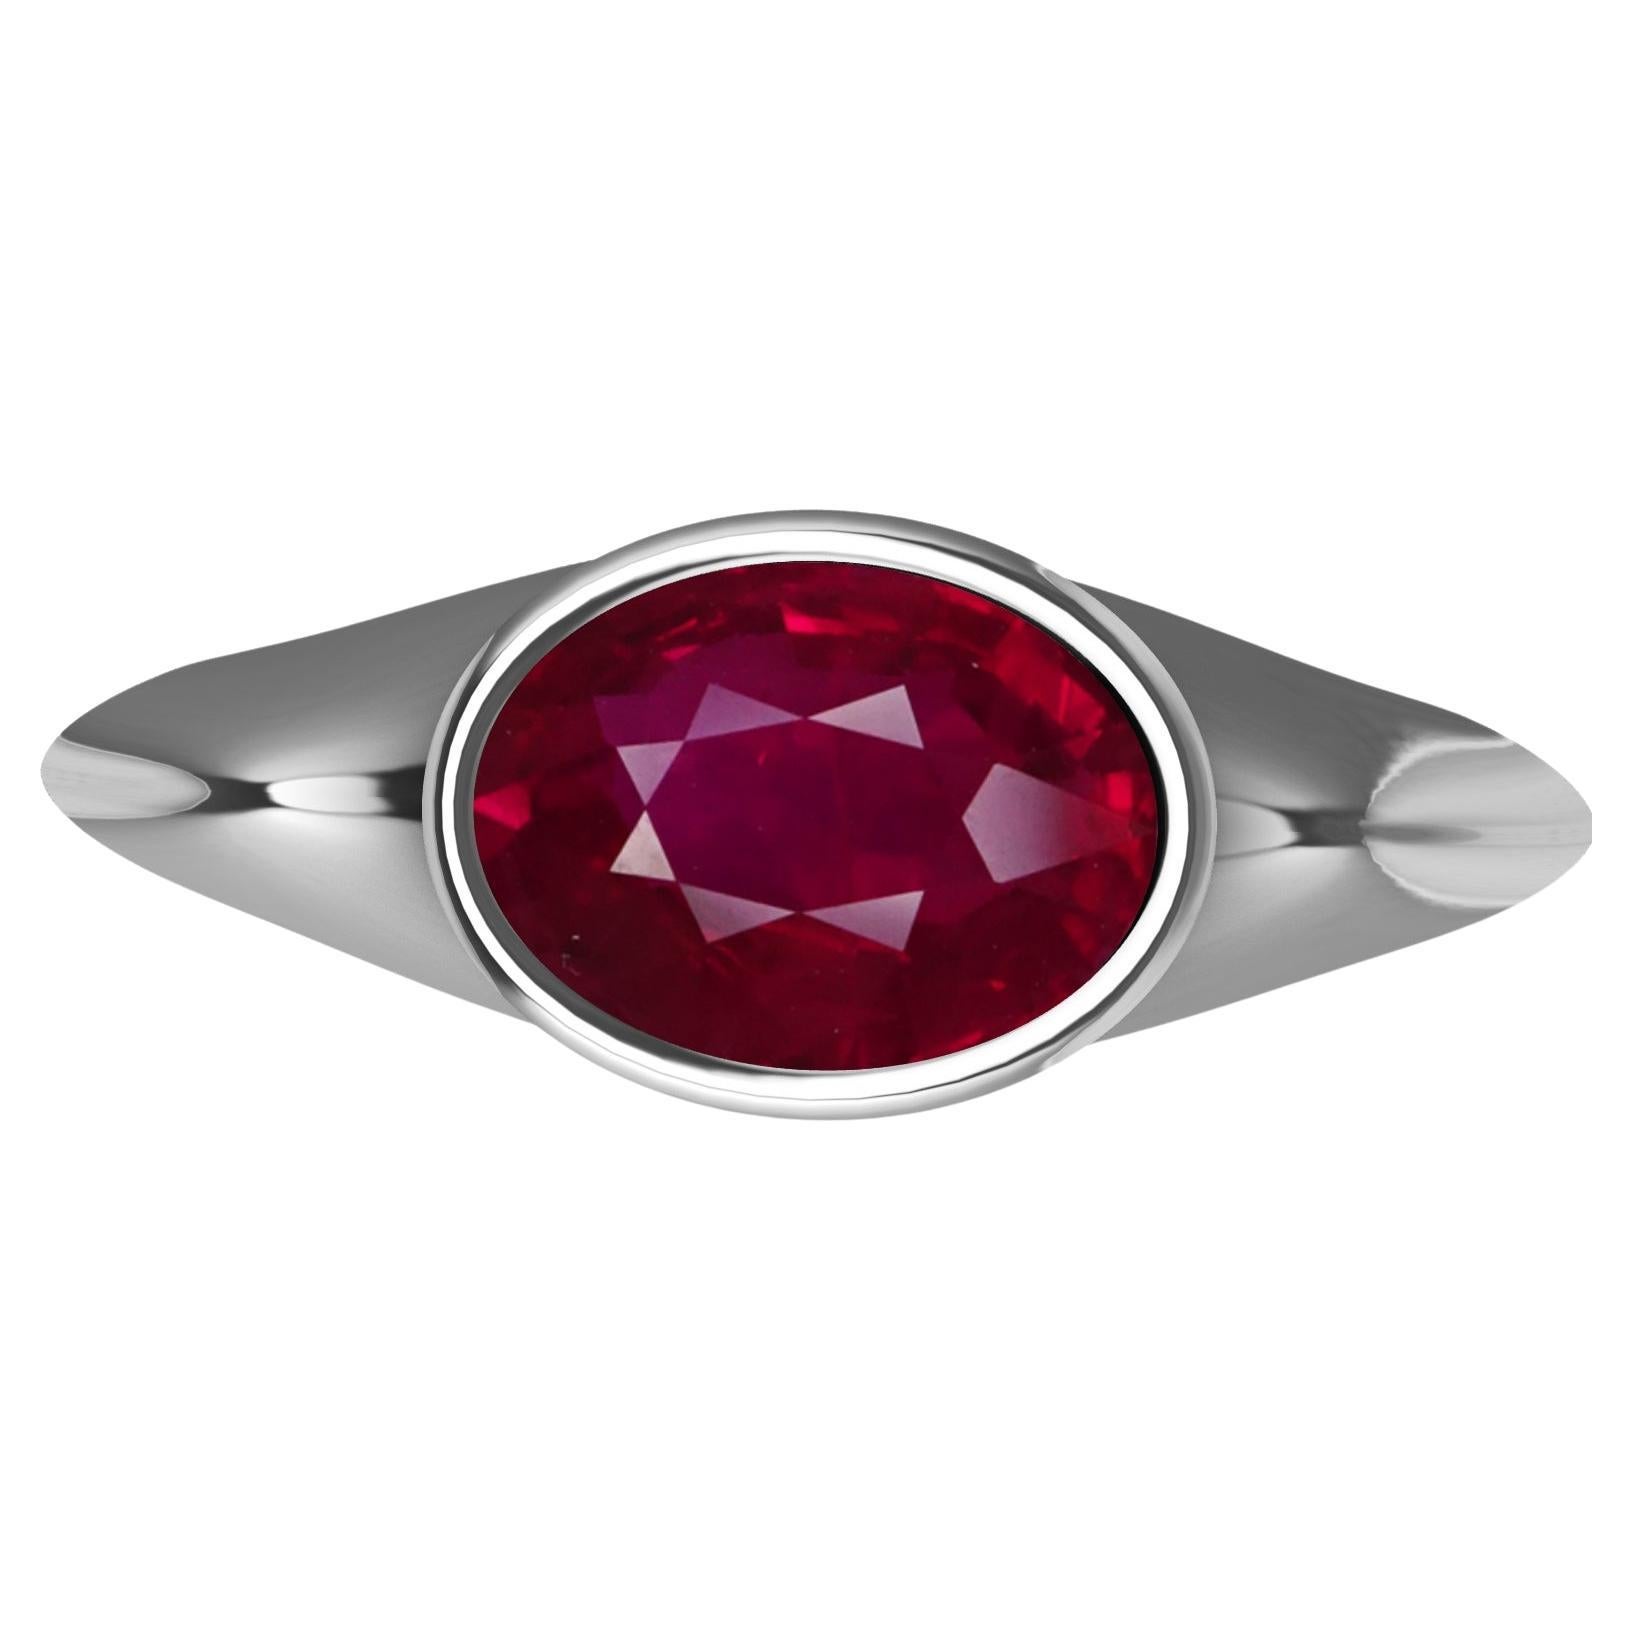 For Sale:  Platinum  2.58 Carats Pigeon Blood Ruby Sculpture Ring